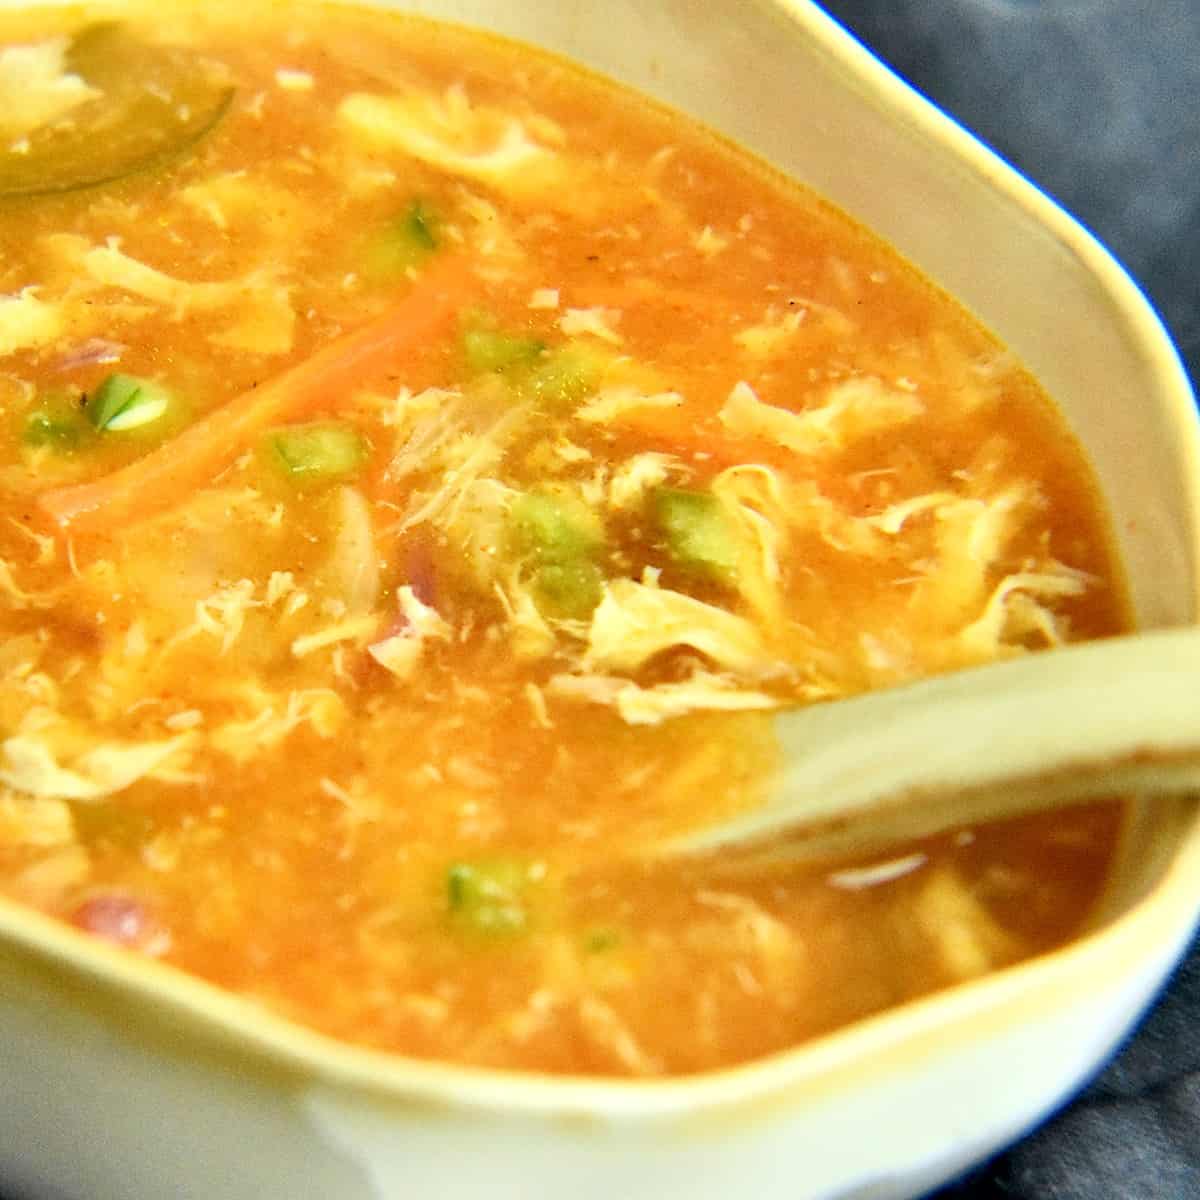 A light grey bowl filled with hot and sour soup in a light orange color with egg ribbons and vegetables floating in it, resting on a blue napkin with condiments in bowls nearby.